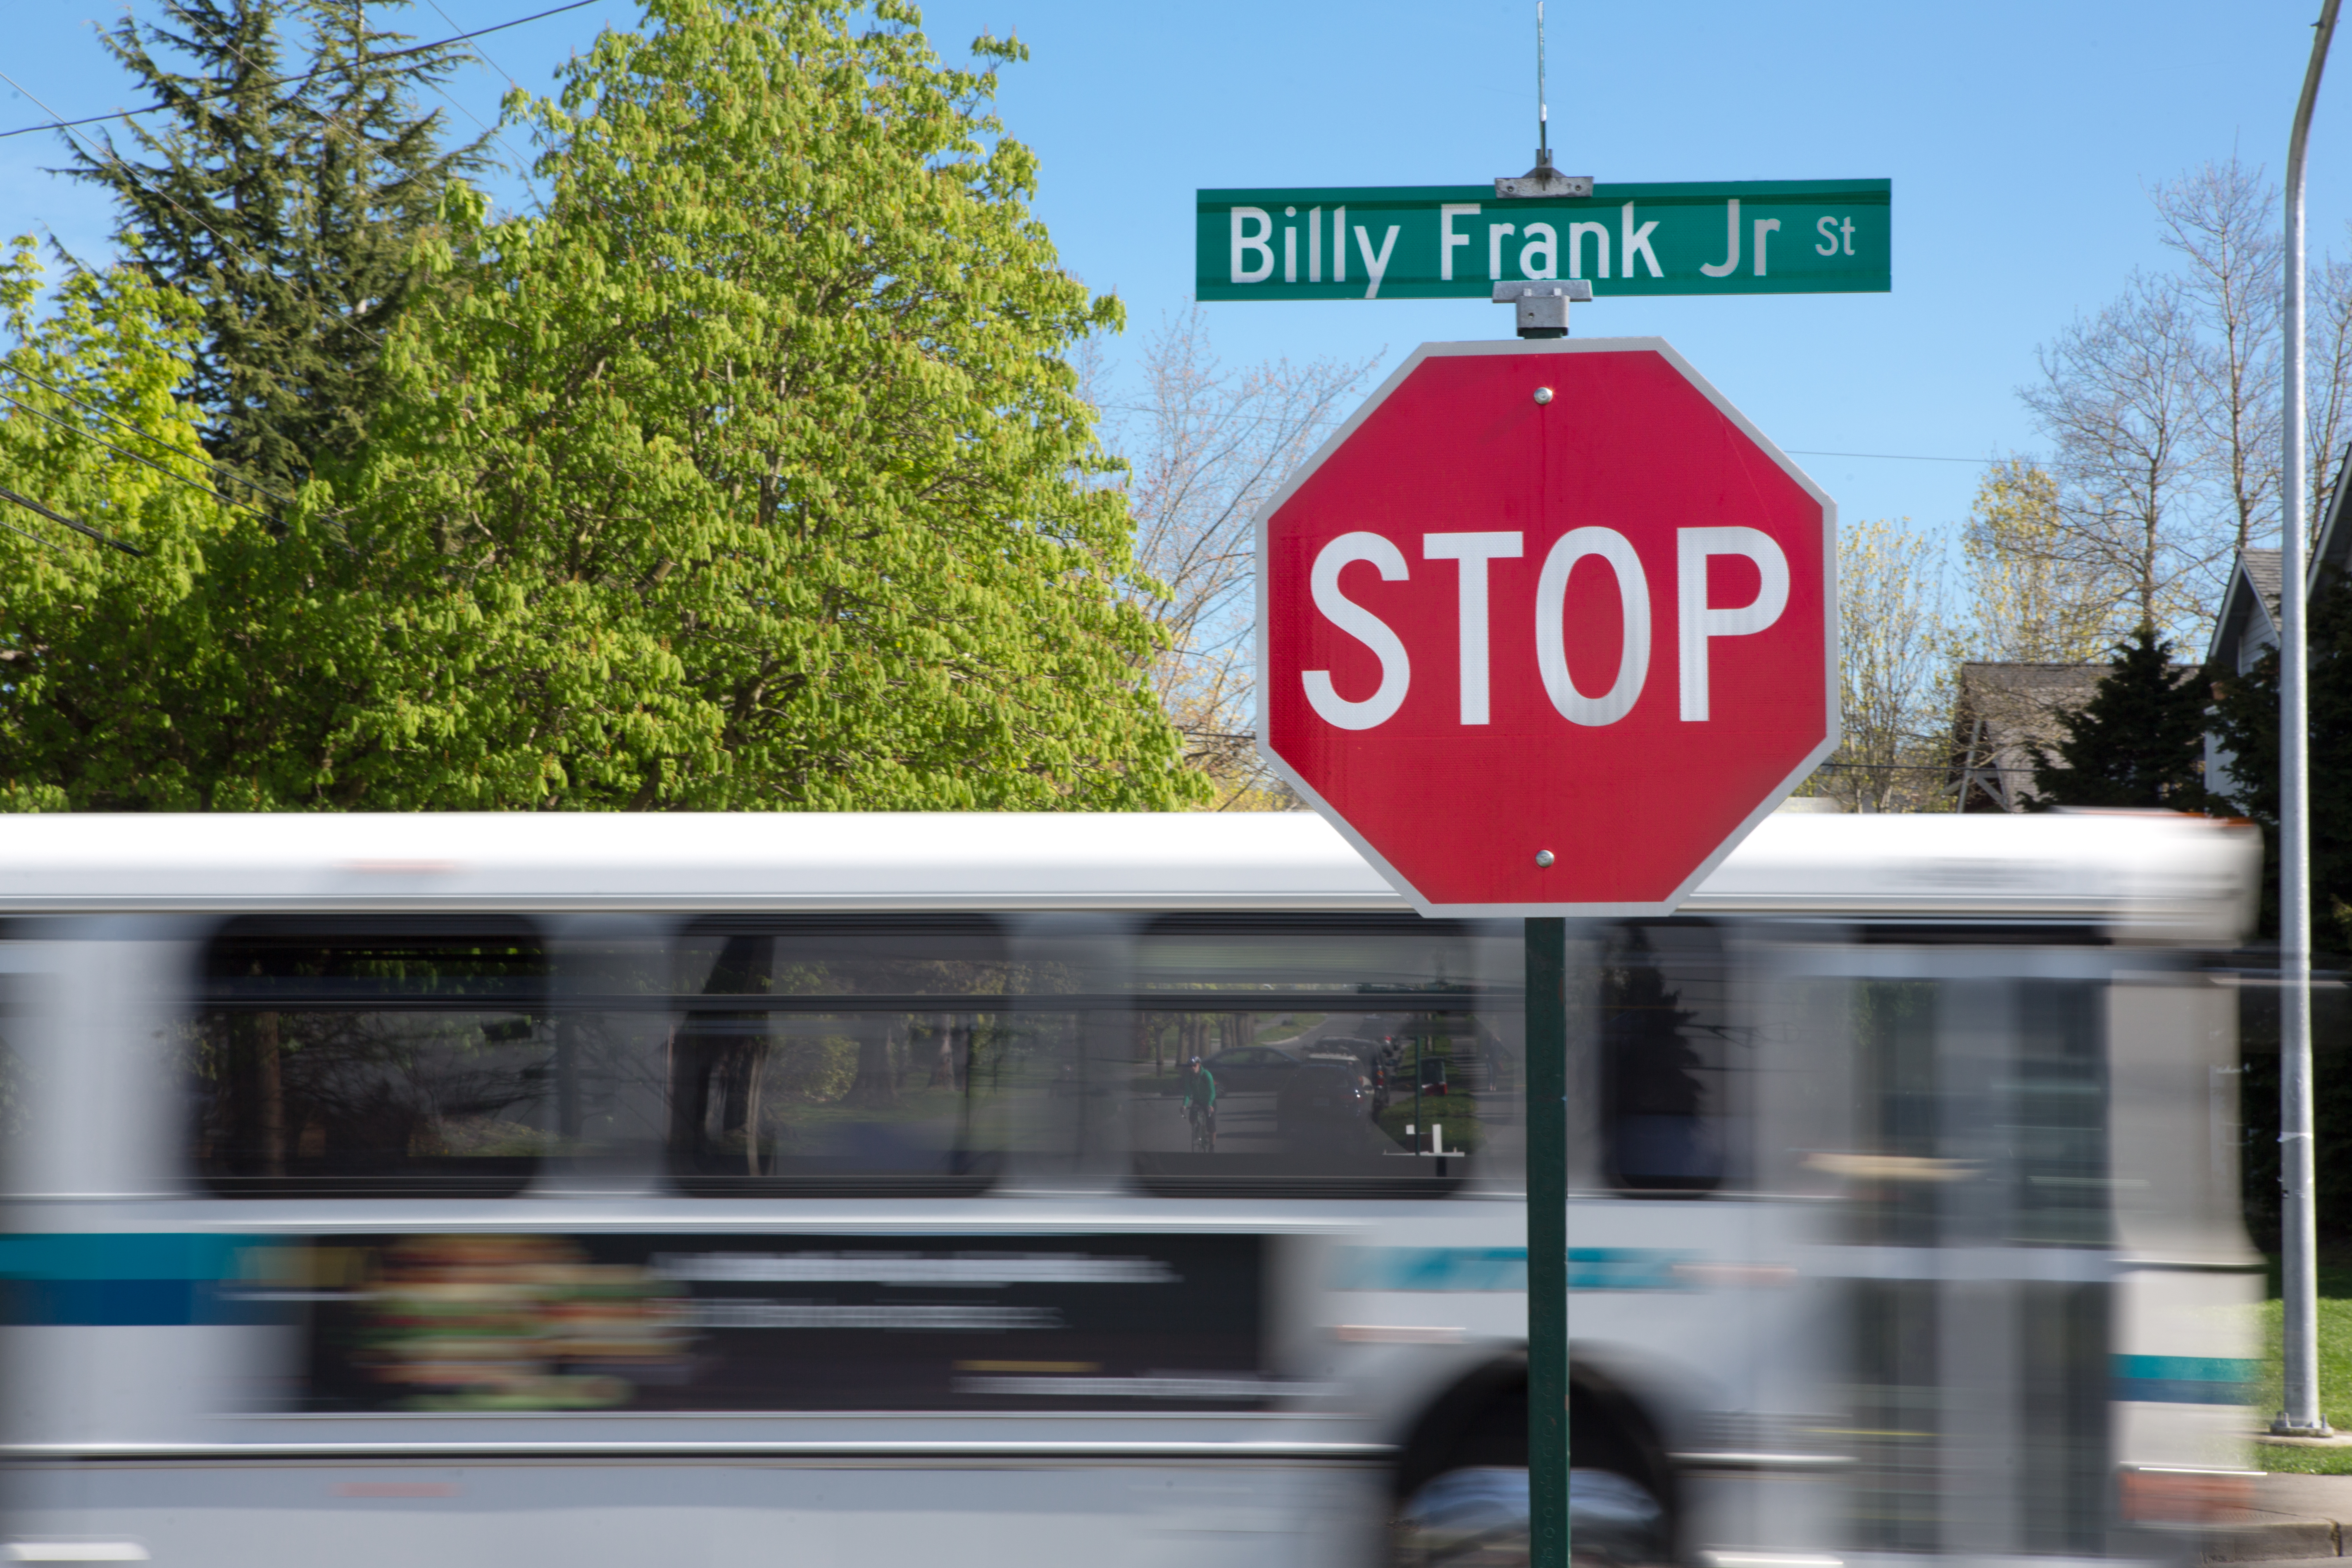 A bus passes a stop sign with a street sign atop: Billy Frank Jr. St.